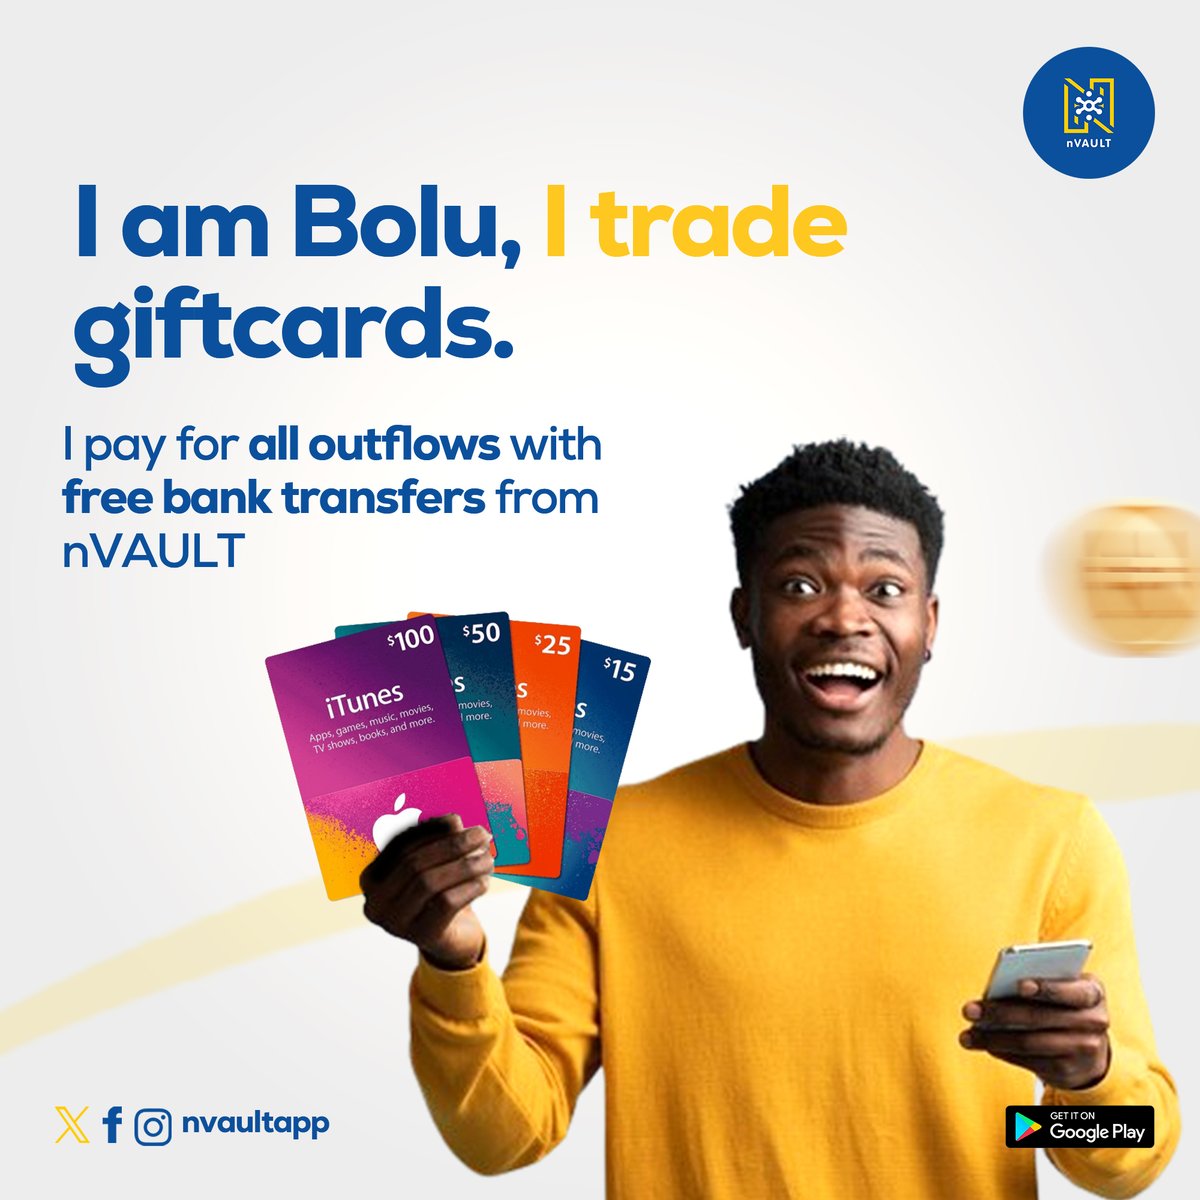 Meet Bolu, a giftcards trader who make free transfers to all his vendors and customers through nVAULT. 

#nVAULT #giftcard #vendor #freetransfers